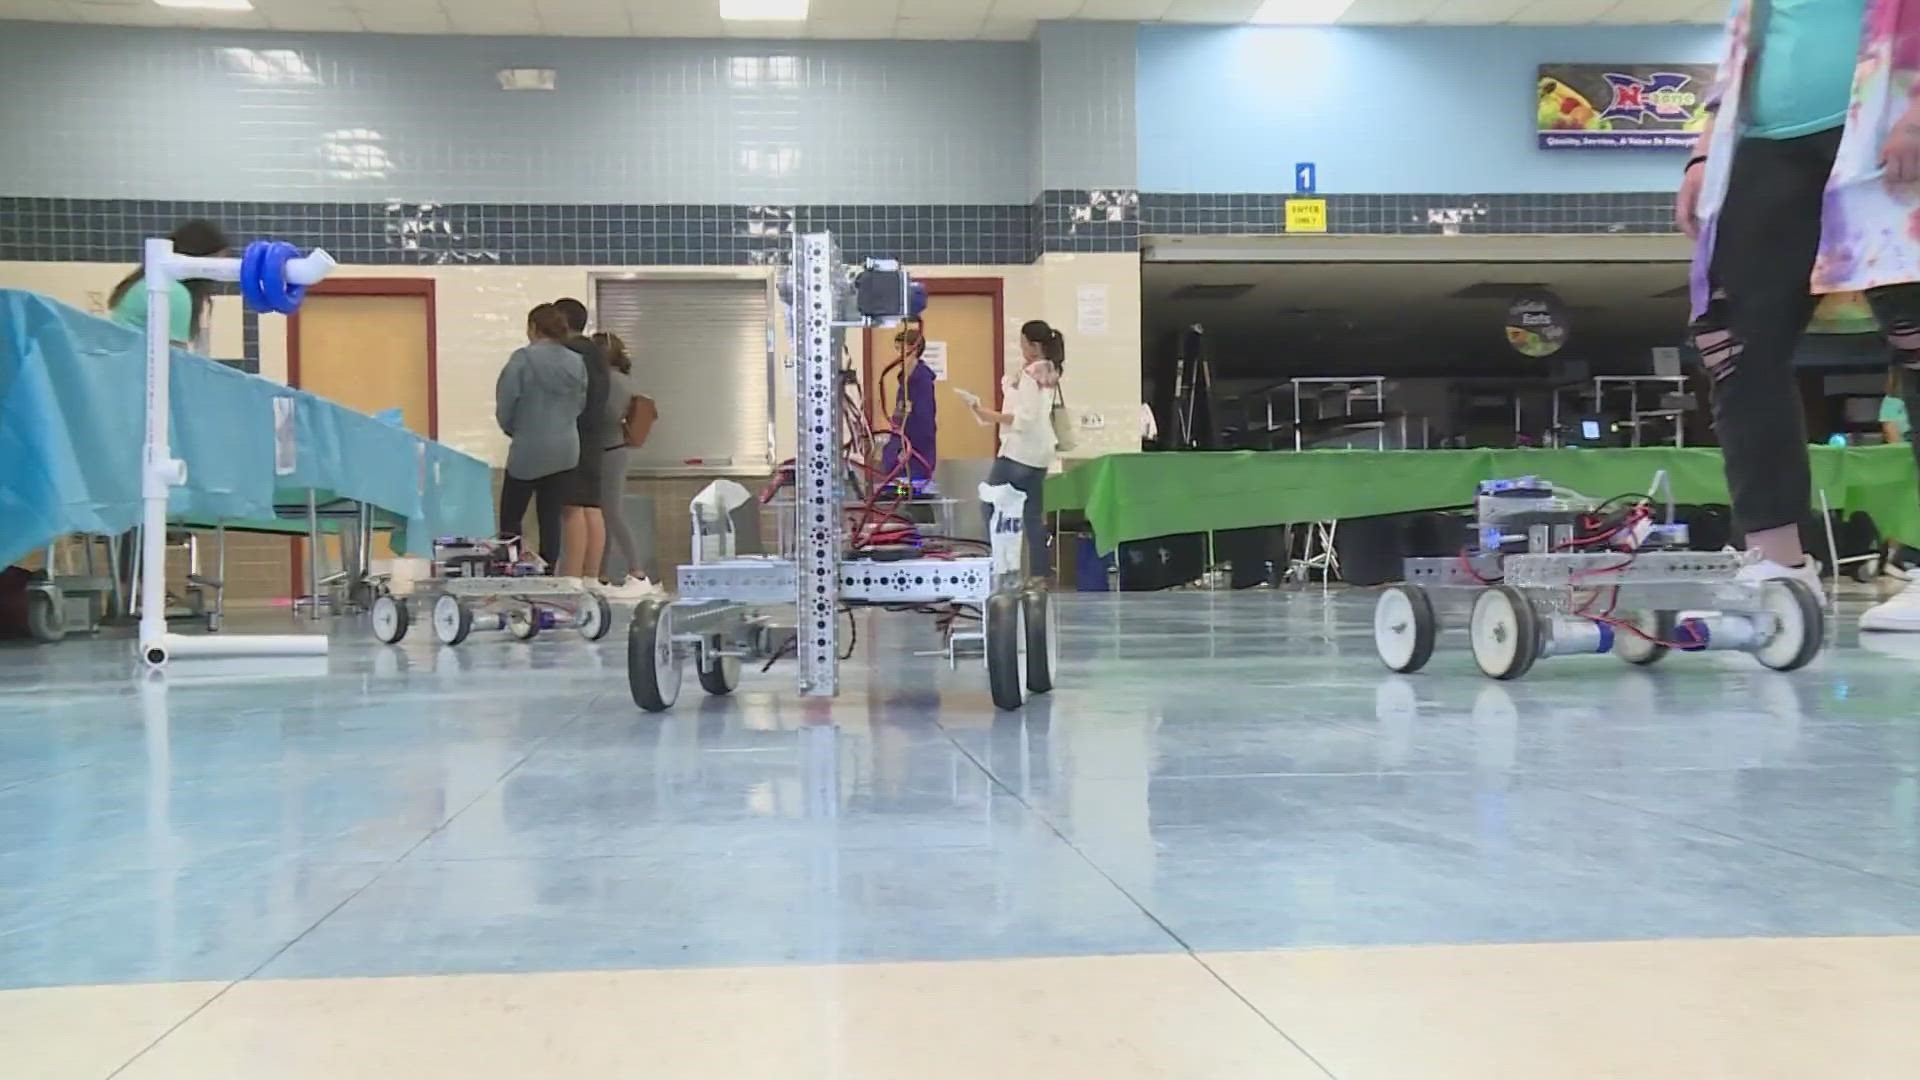 Students learned how to code and operate robots.